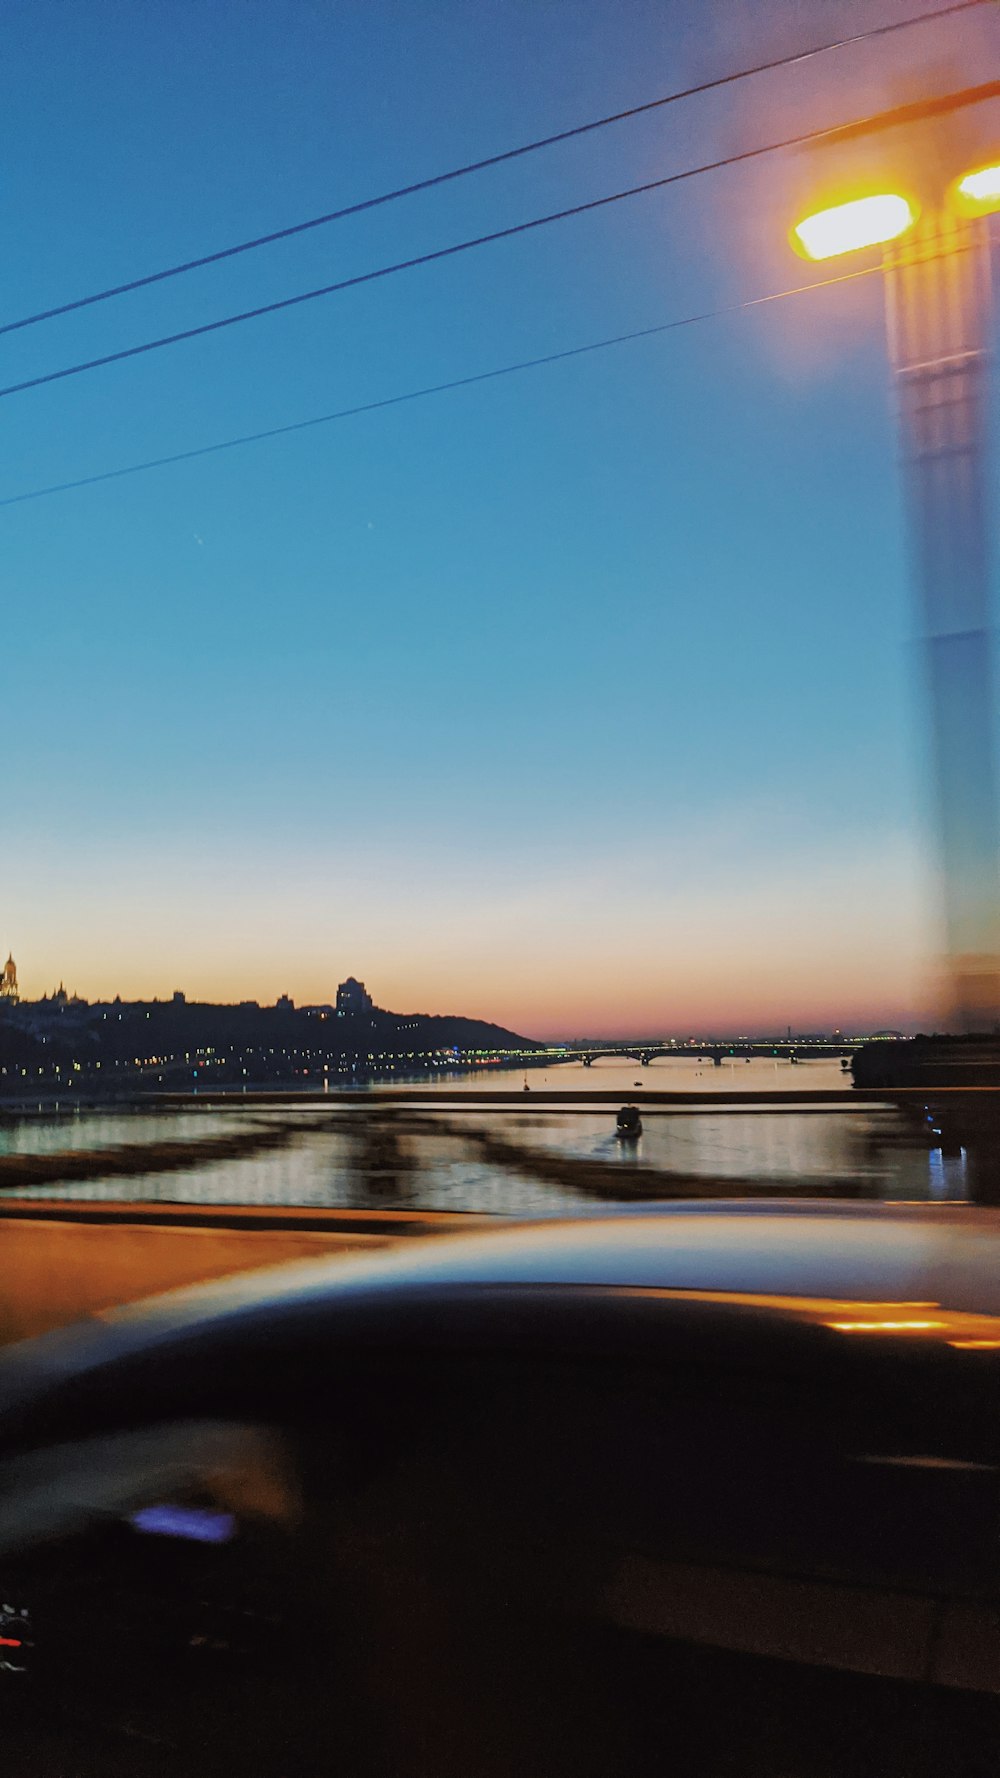 a view of a city from a moving car